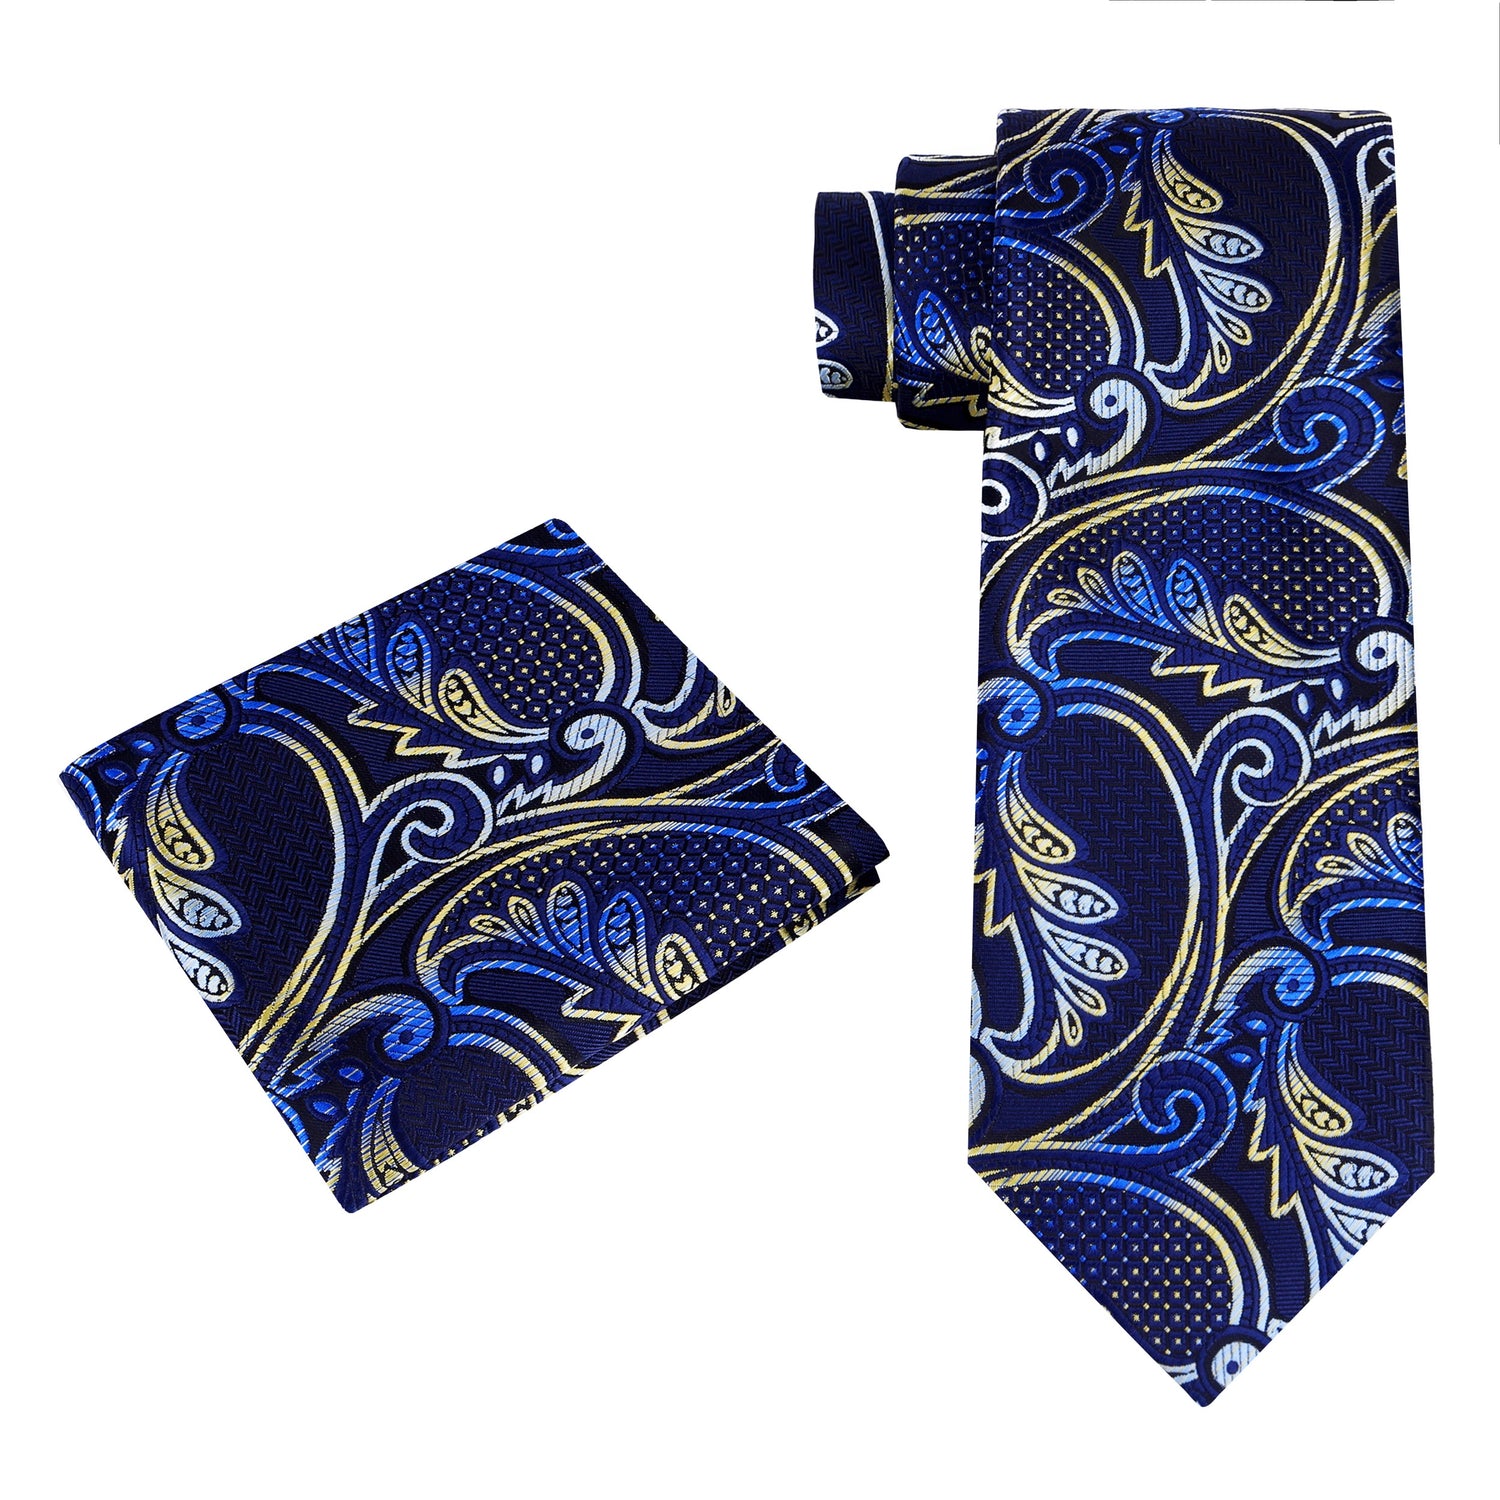 View 2: Blue, Yellow Gold Paisley Tie and Pocket Square